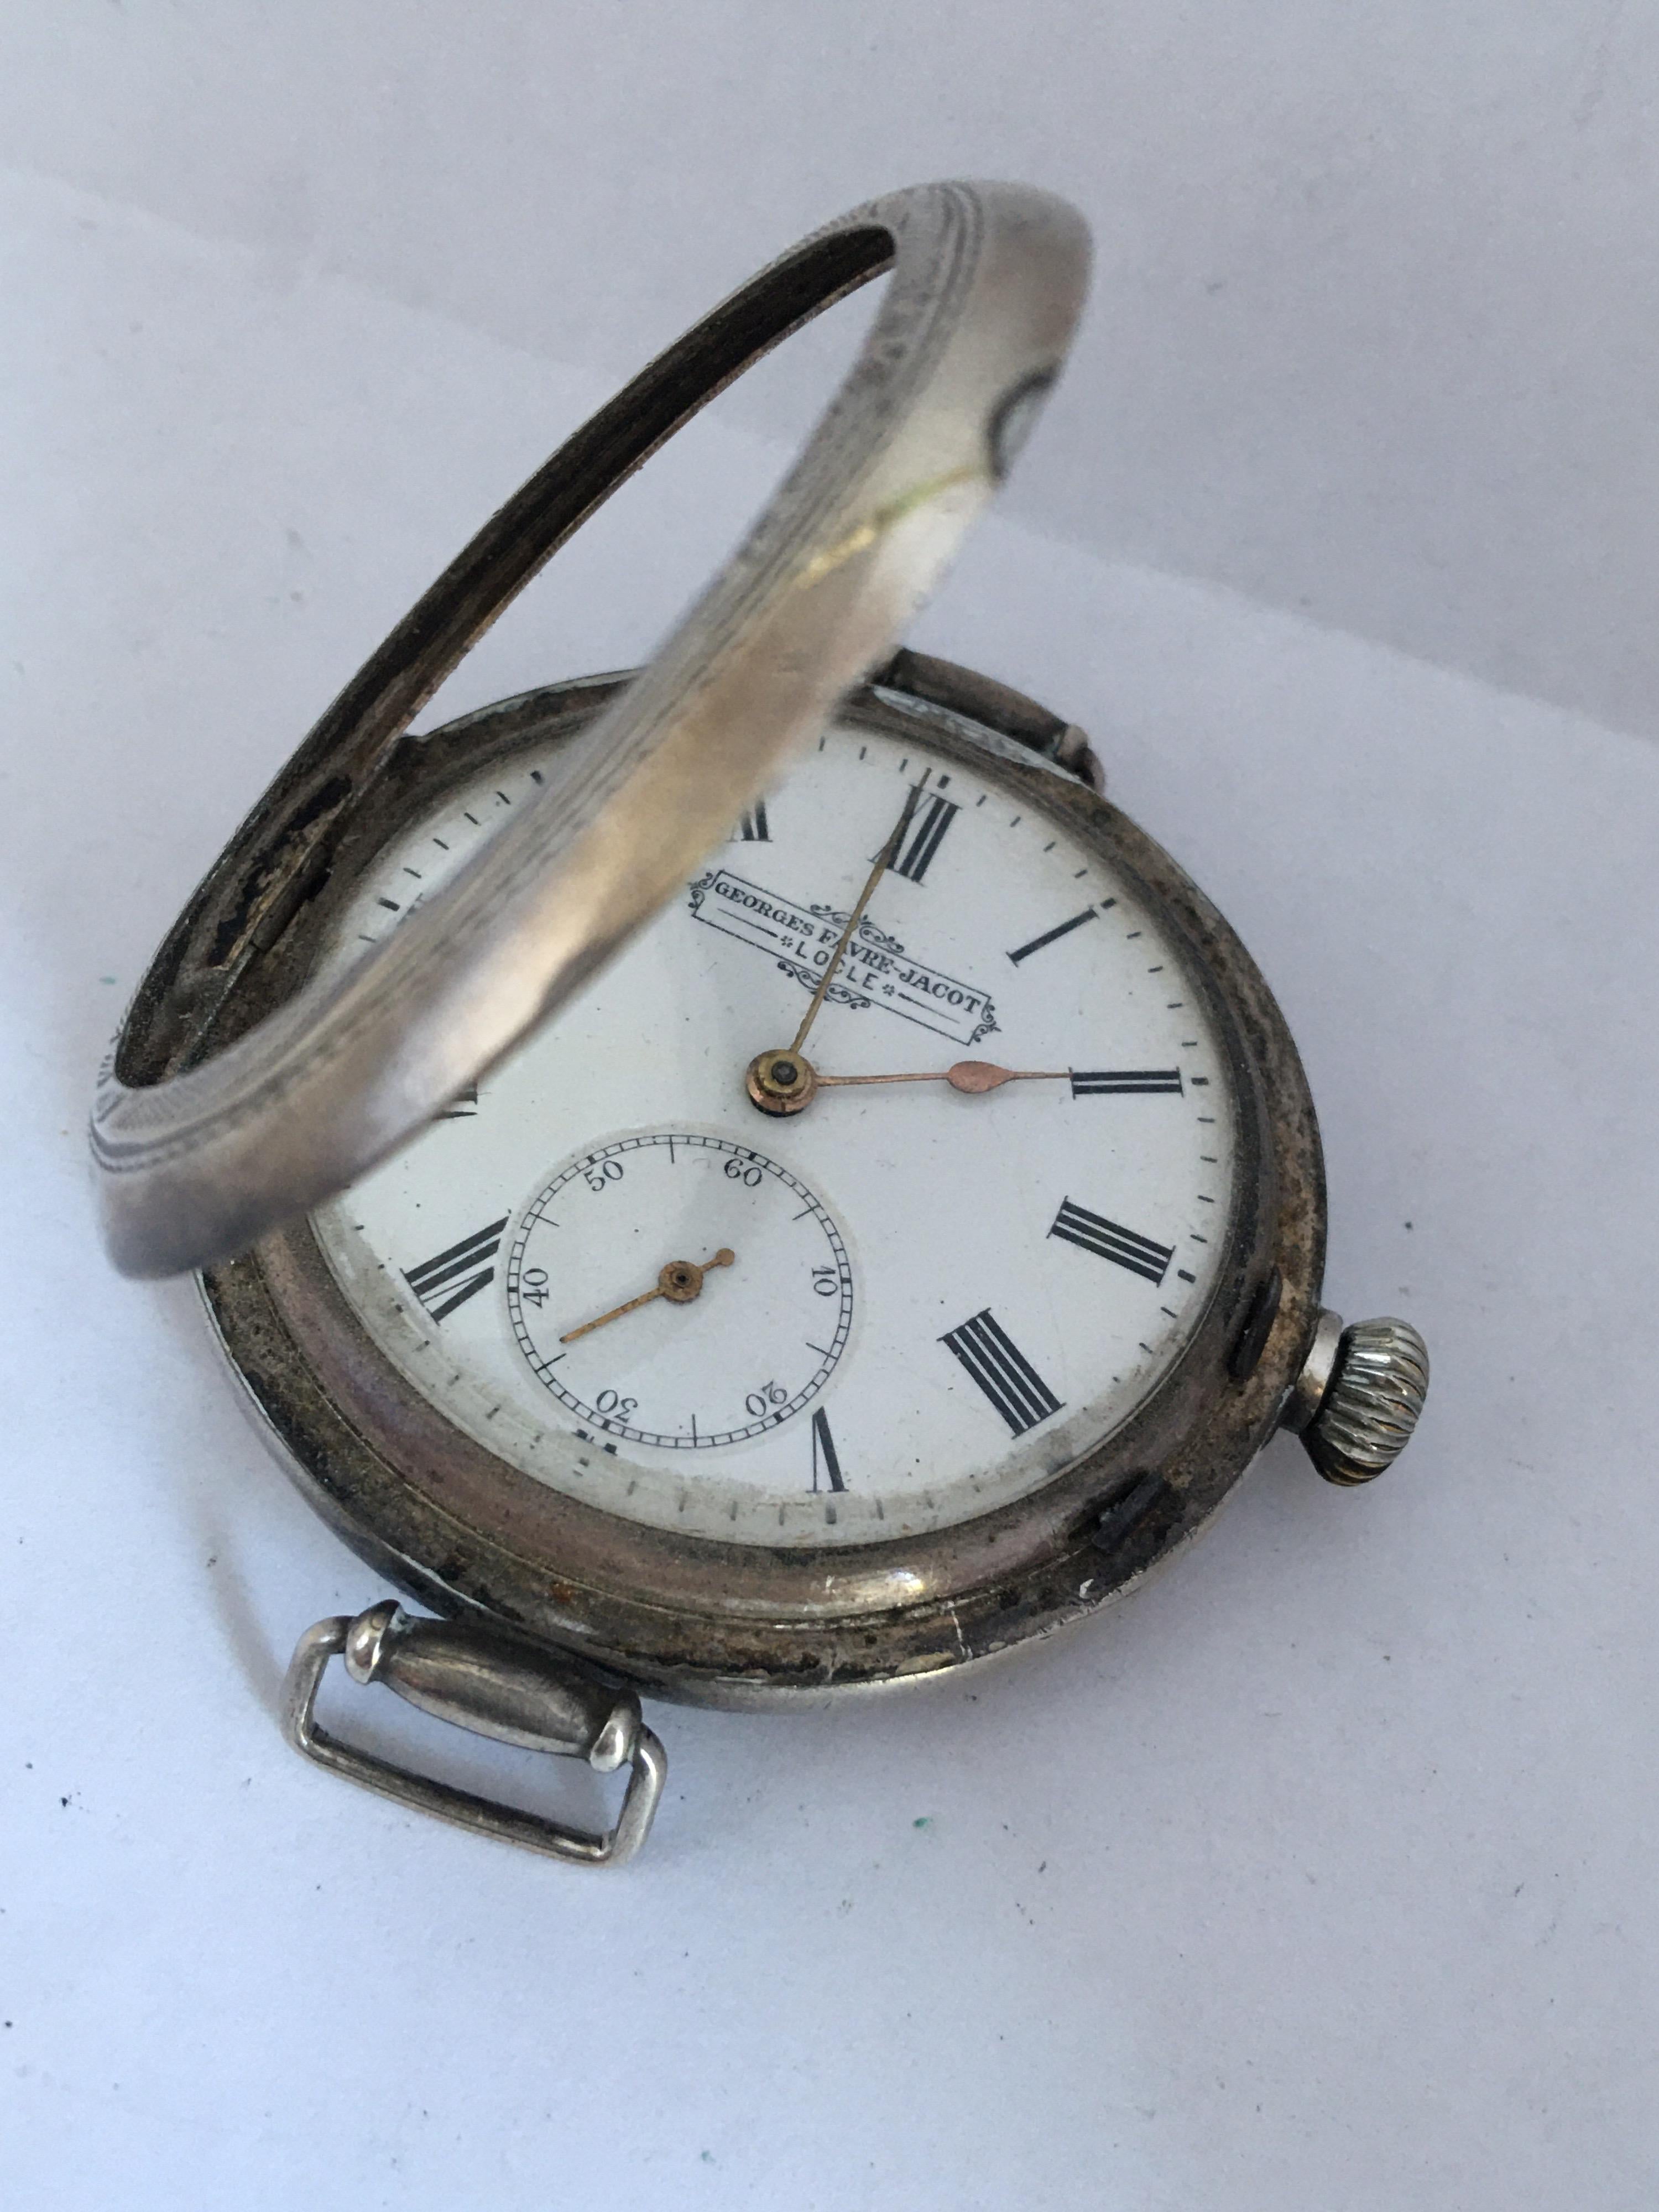 Rare Antique Unusual Hand-Winding Trench Watch Signed Georges Favre-Jacot 8